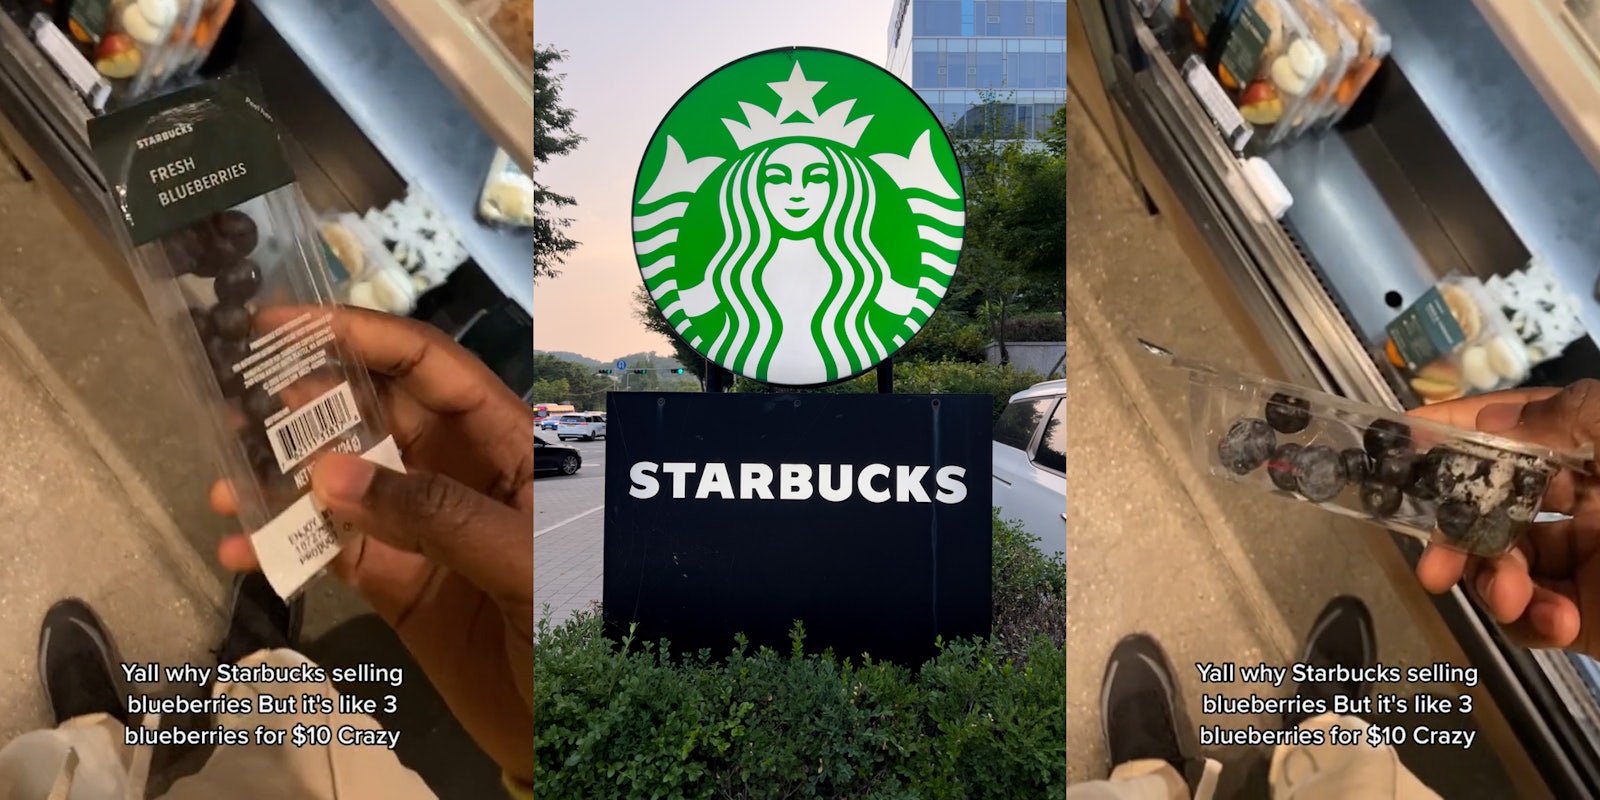 person holding small container of blueberries with caption 'Yall why Starbucks selling blueberries But it's like 3 blueberries for $10 Crazy' (l) Starbucks sign outside (c) person holding small container of blueberries with caption 'Yall why Starbucks selling blueberries But it's like 3 blueberries for $10 Crazy' (r)